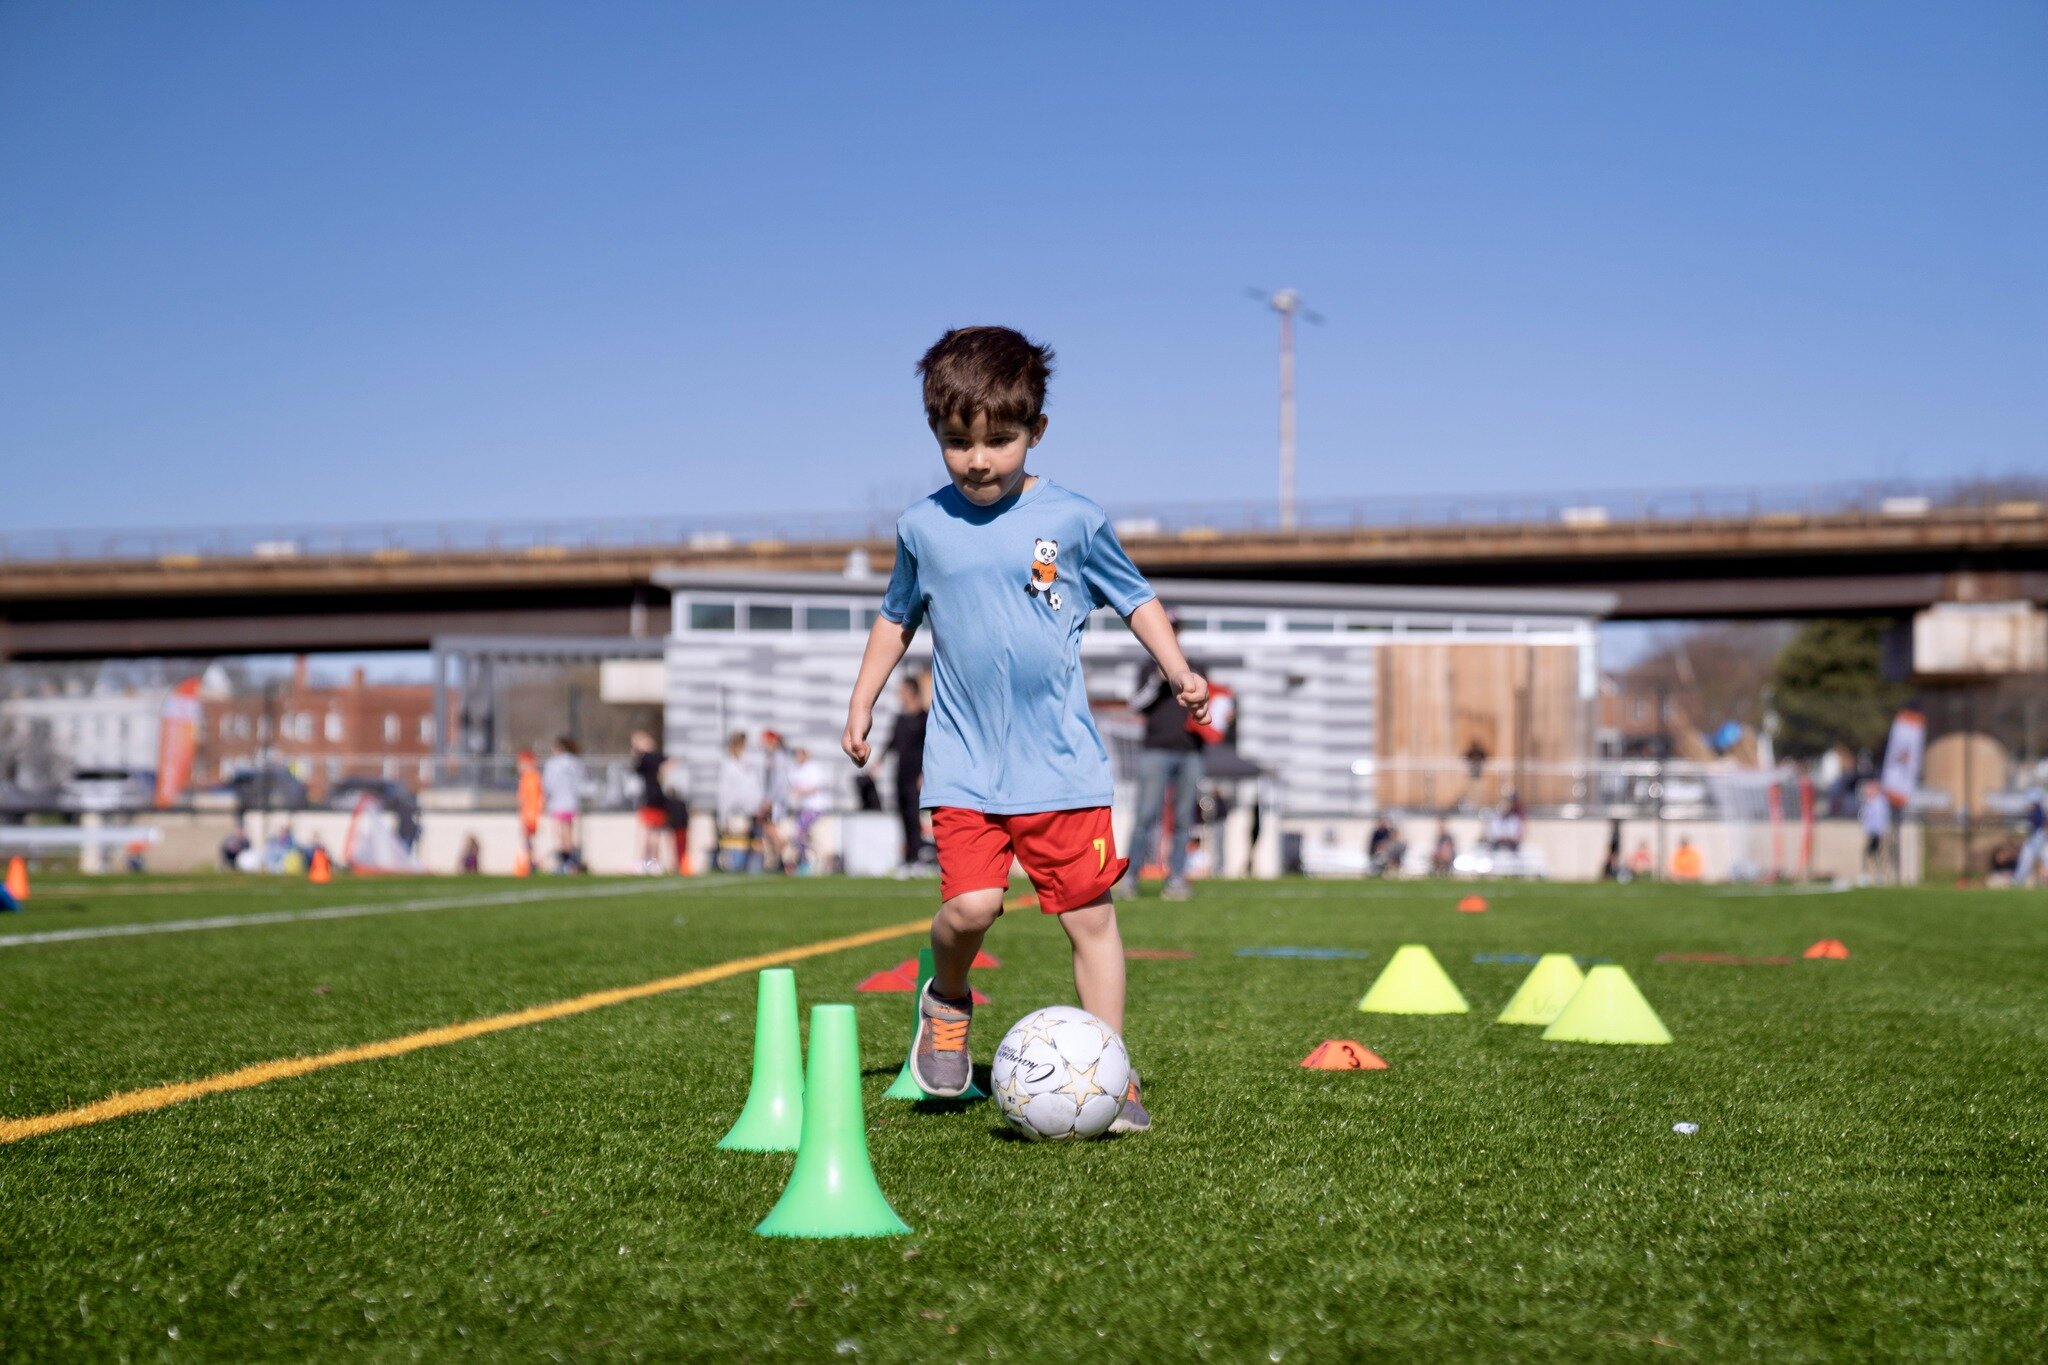 Happy Monday, DC Way family! ☀️ Start your week off with a smile because registration is OPEN for our Summer Camps, Spring Break Camps, and One Day Camps! Don't miss out on the fun &ndash; join us for an unforgettable soccer experience at www.dcway.c